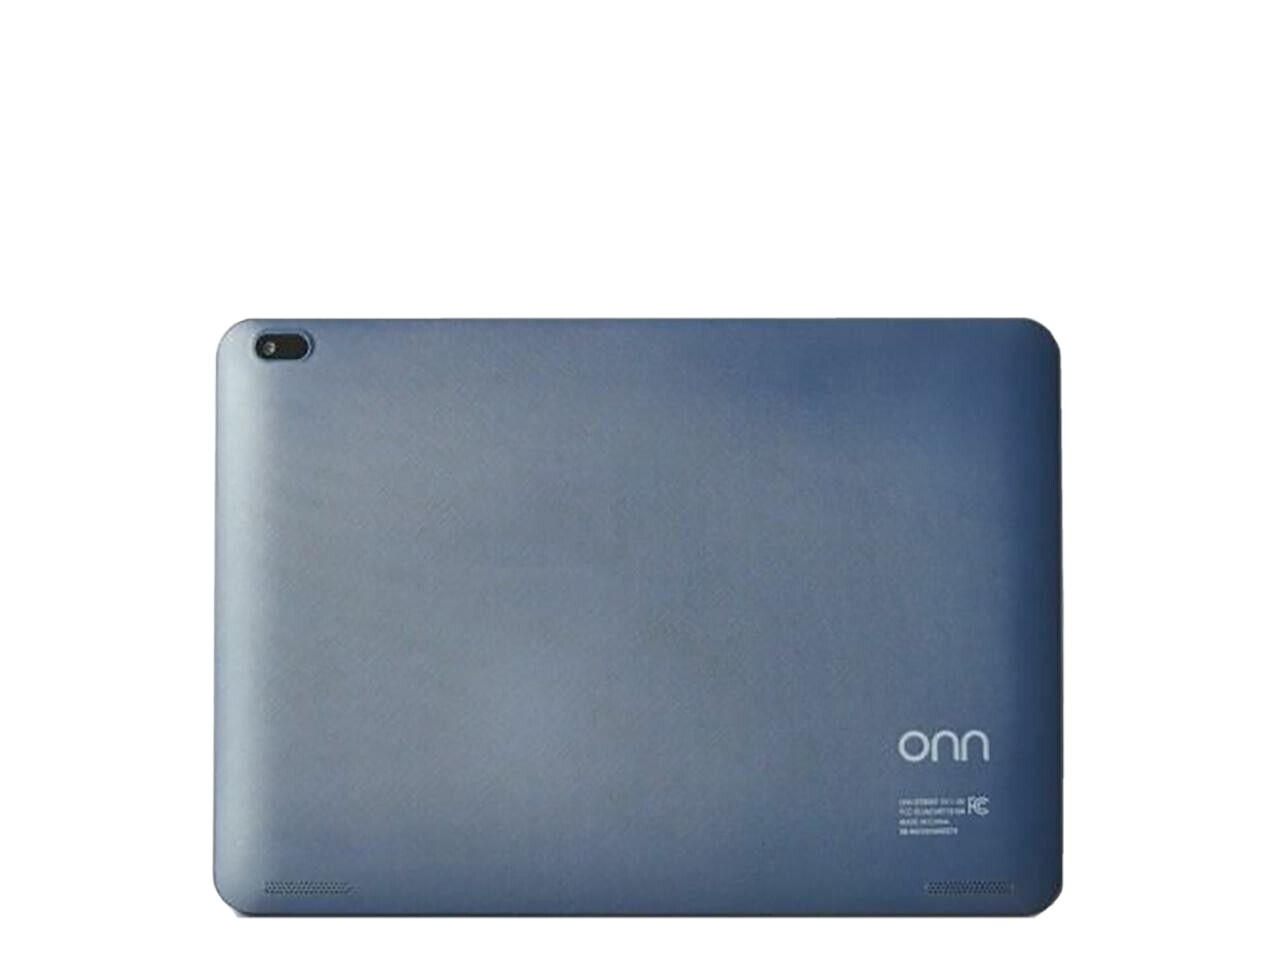 Onn 10.1" Android Touch Tablet, 16GB Storage, 2GB RAM, 1.3 GHz Quad-Core